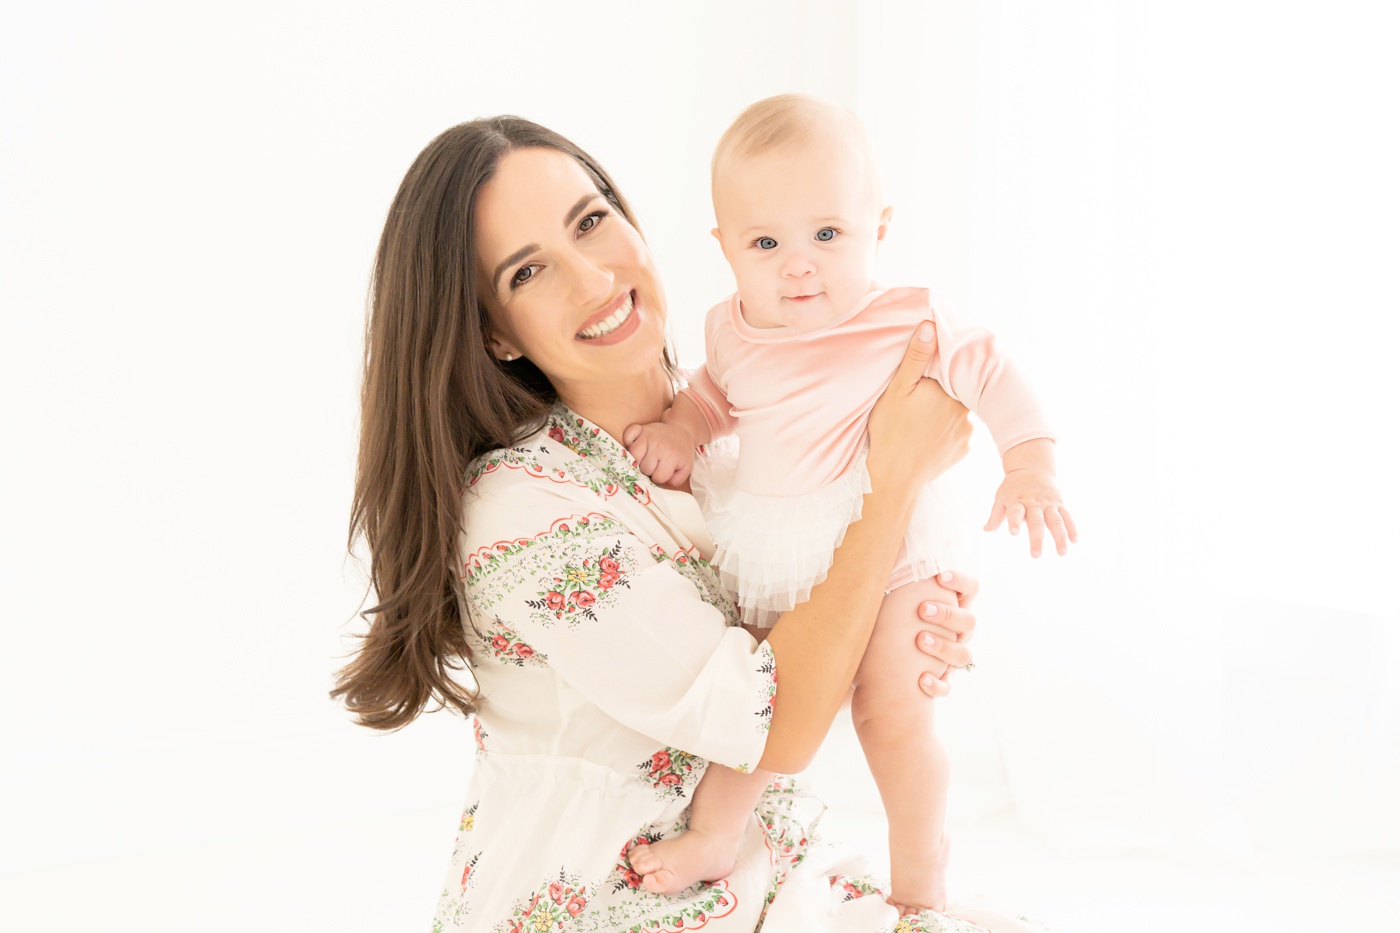 Mom and baby being photographed in a white photography studio